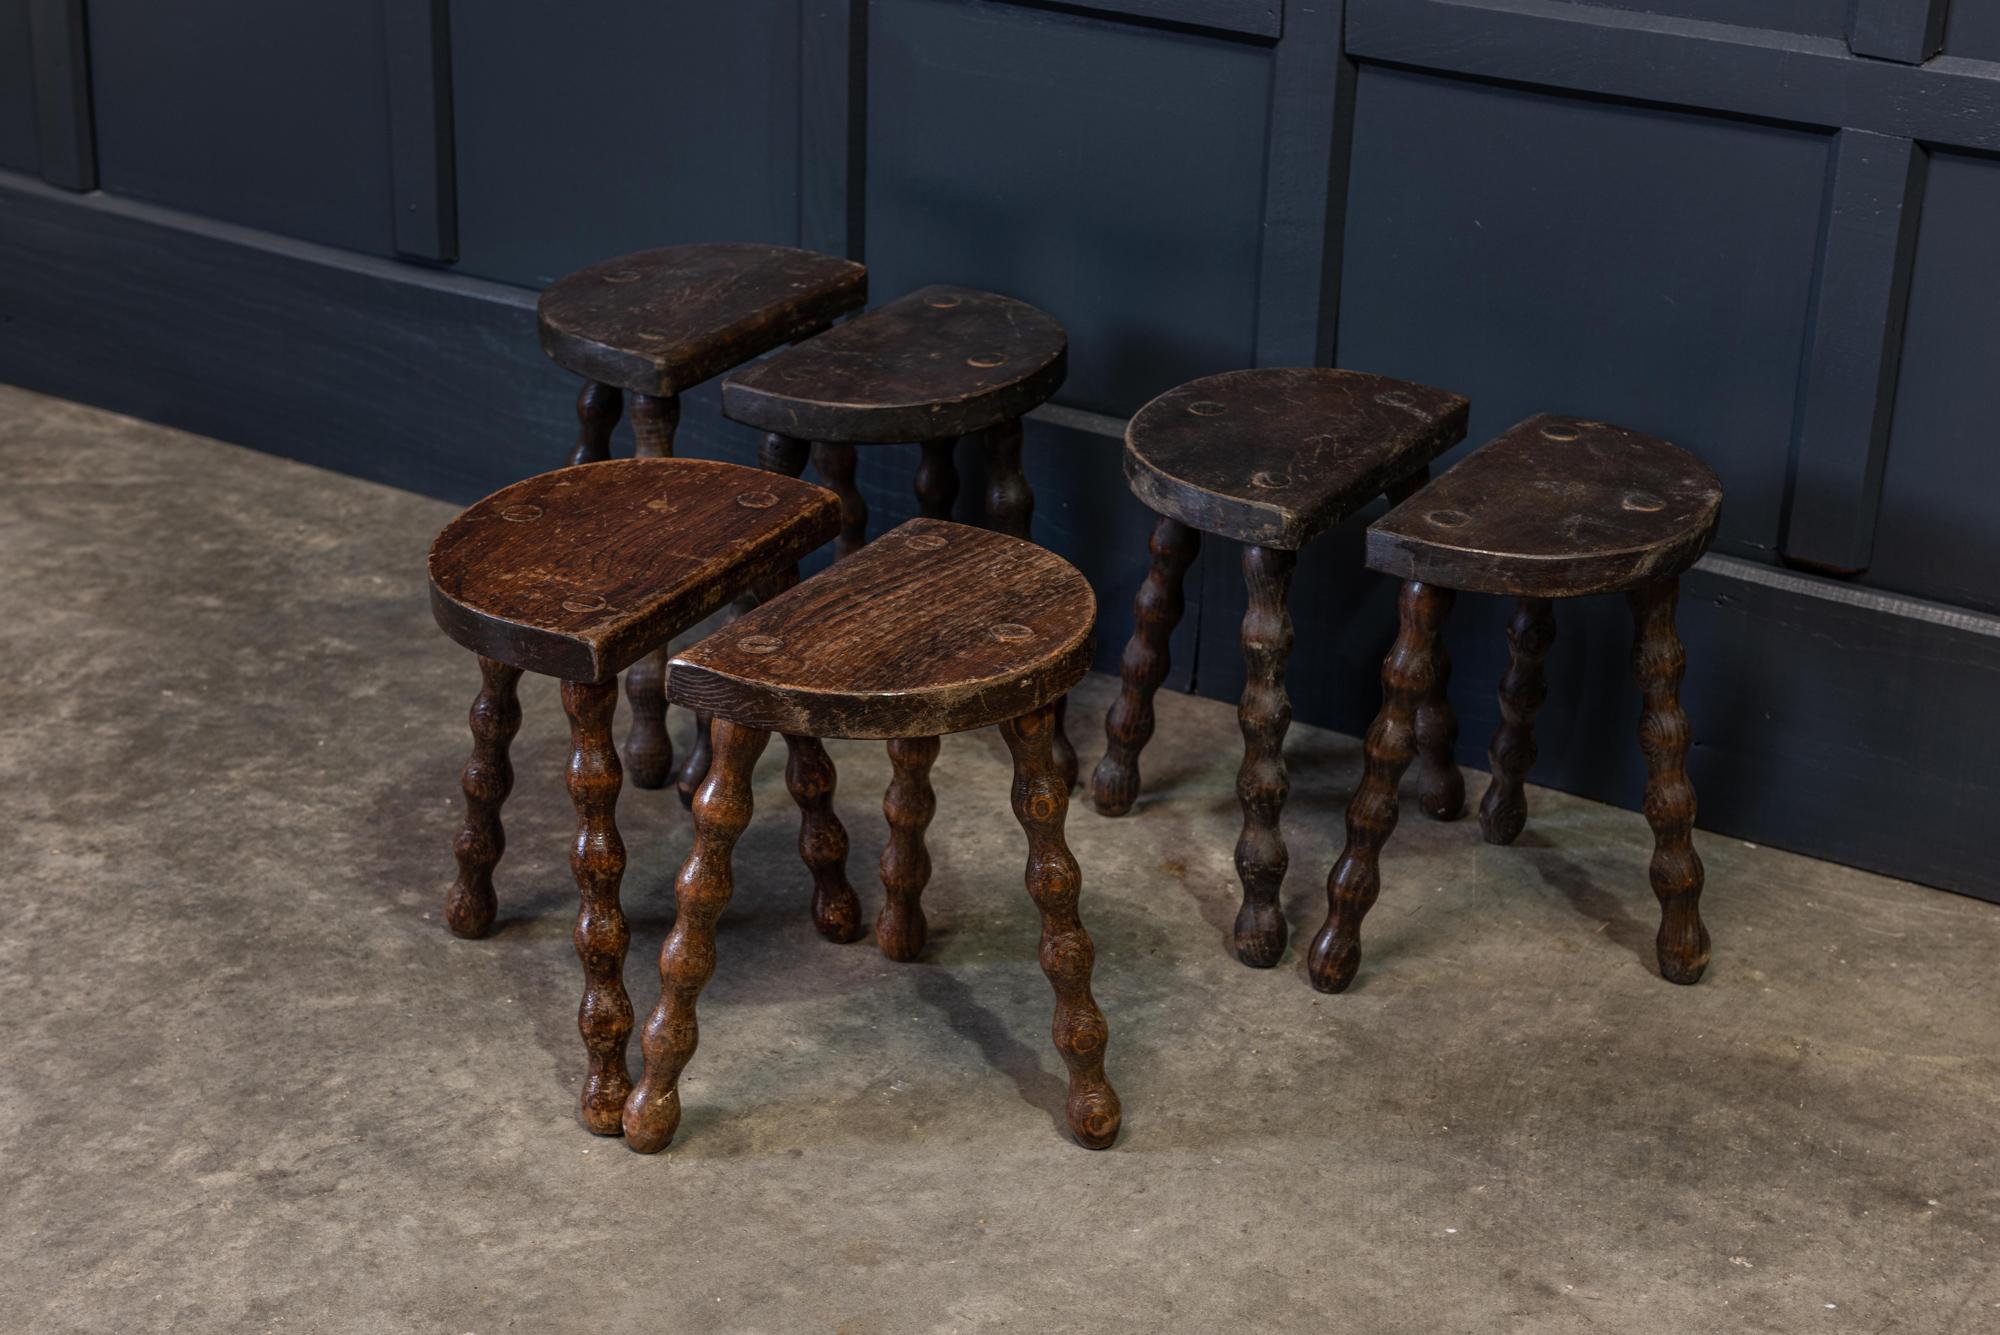 19th century French oak bobbin dairy stools,
circa 1860.

French oak bobbin dairy stools

Price per pair.

2 sets available

Measures: W 27.5 x H 31 x D 18 cm.